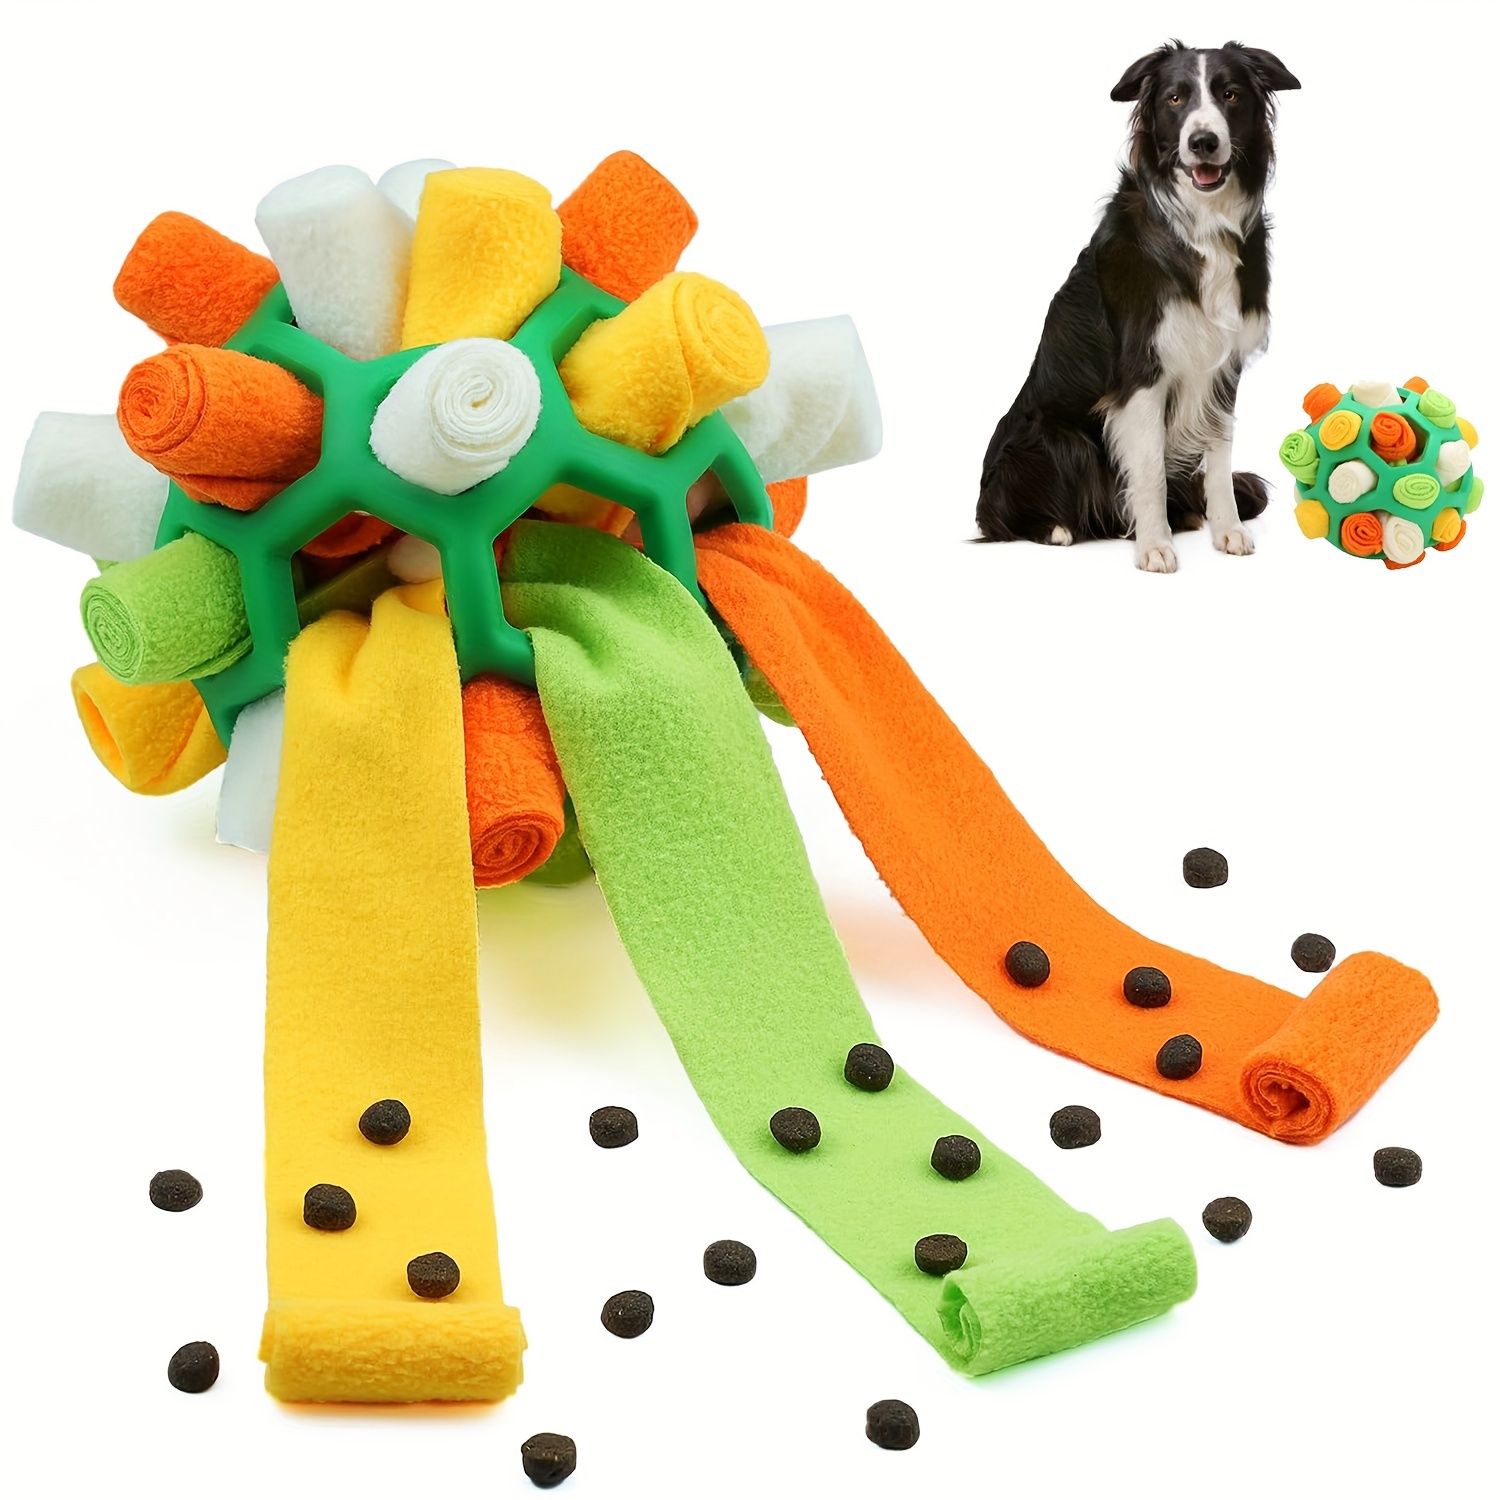 1pc Dog Puzzle Toys Interactive Puzzle Game Dog Toy For Smart Dogs IQ  Stimulation Treat Puzzle Toy For Dogs Treat Training,Puzzle Slow Feeder To  Aid P